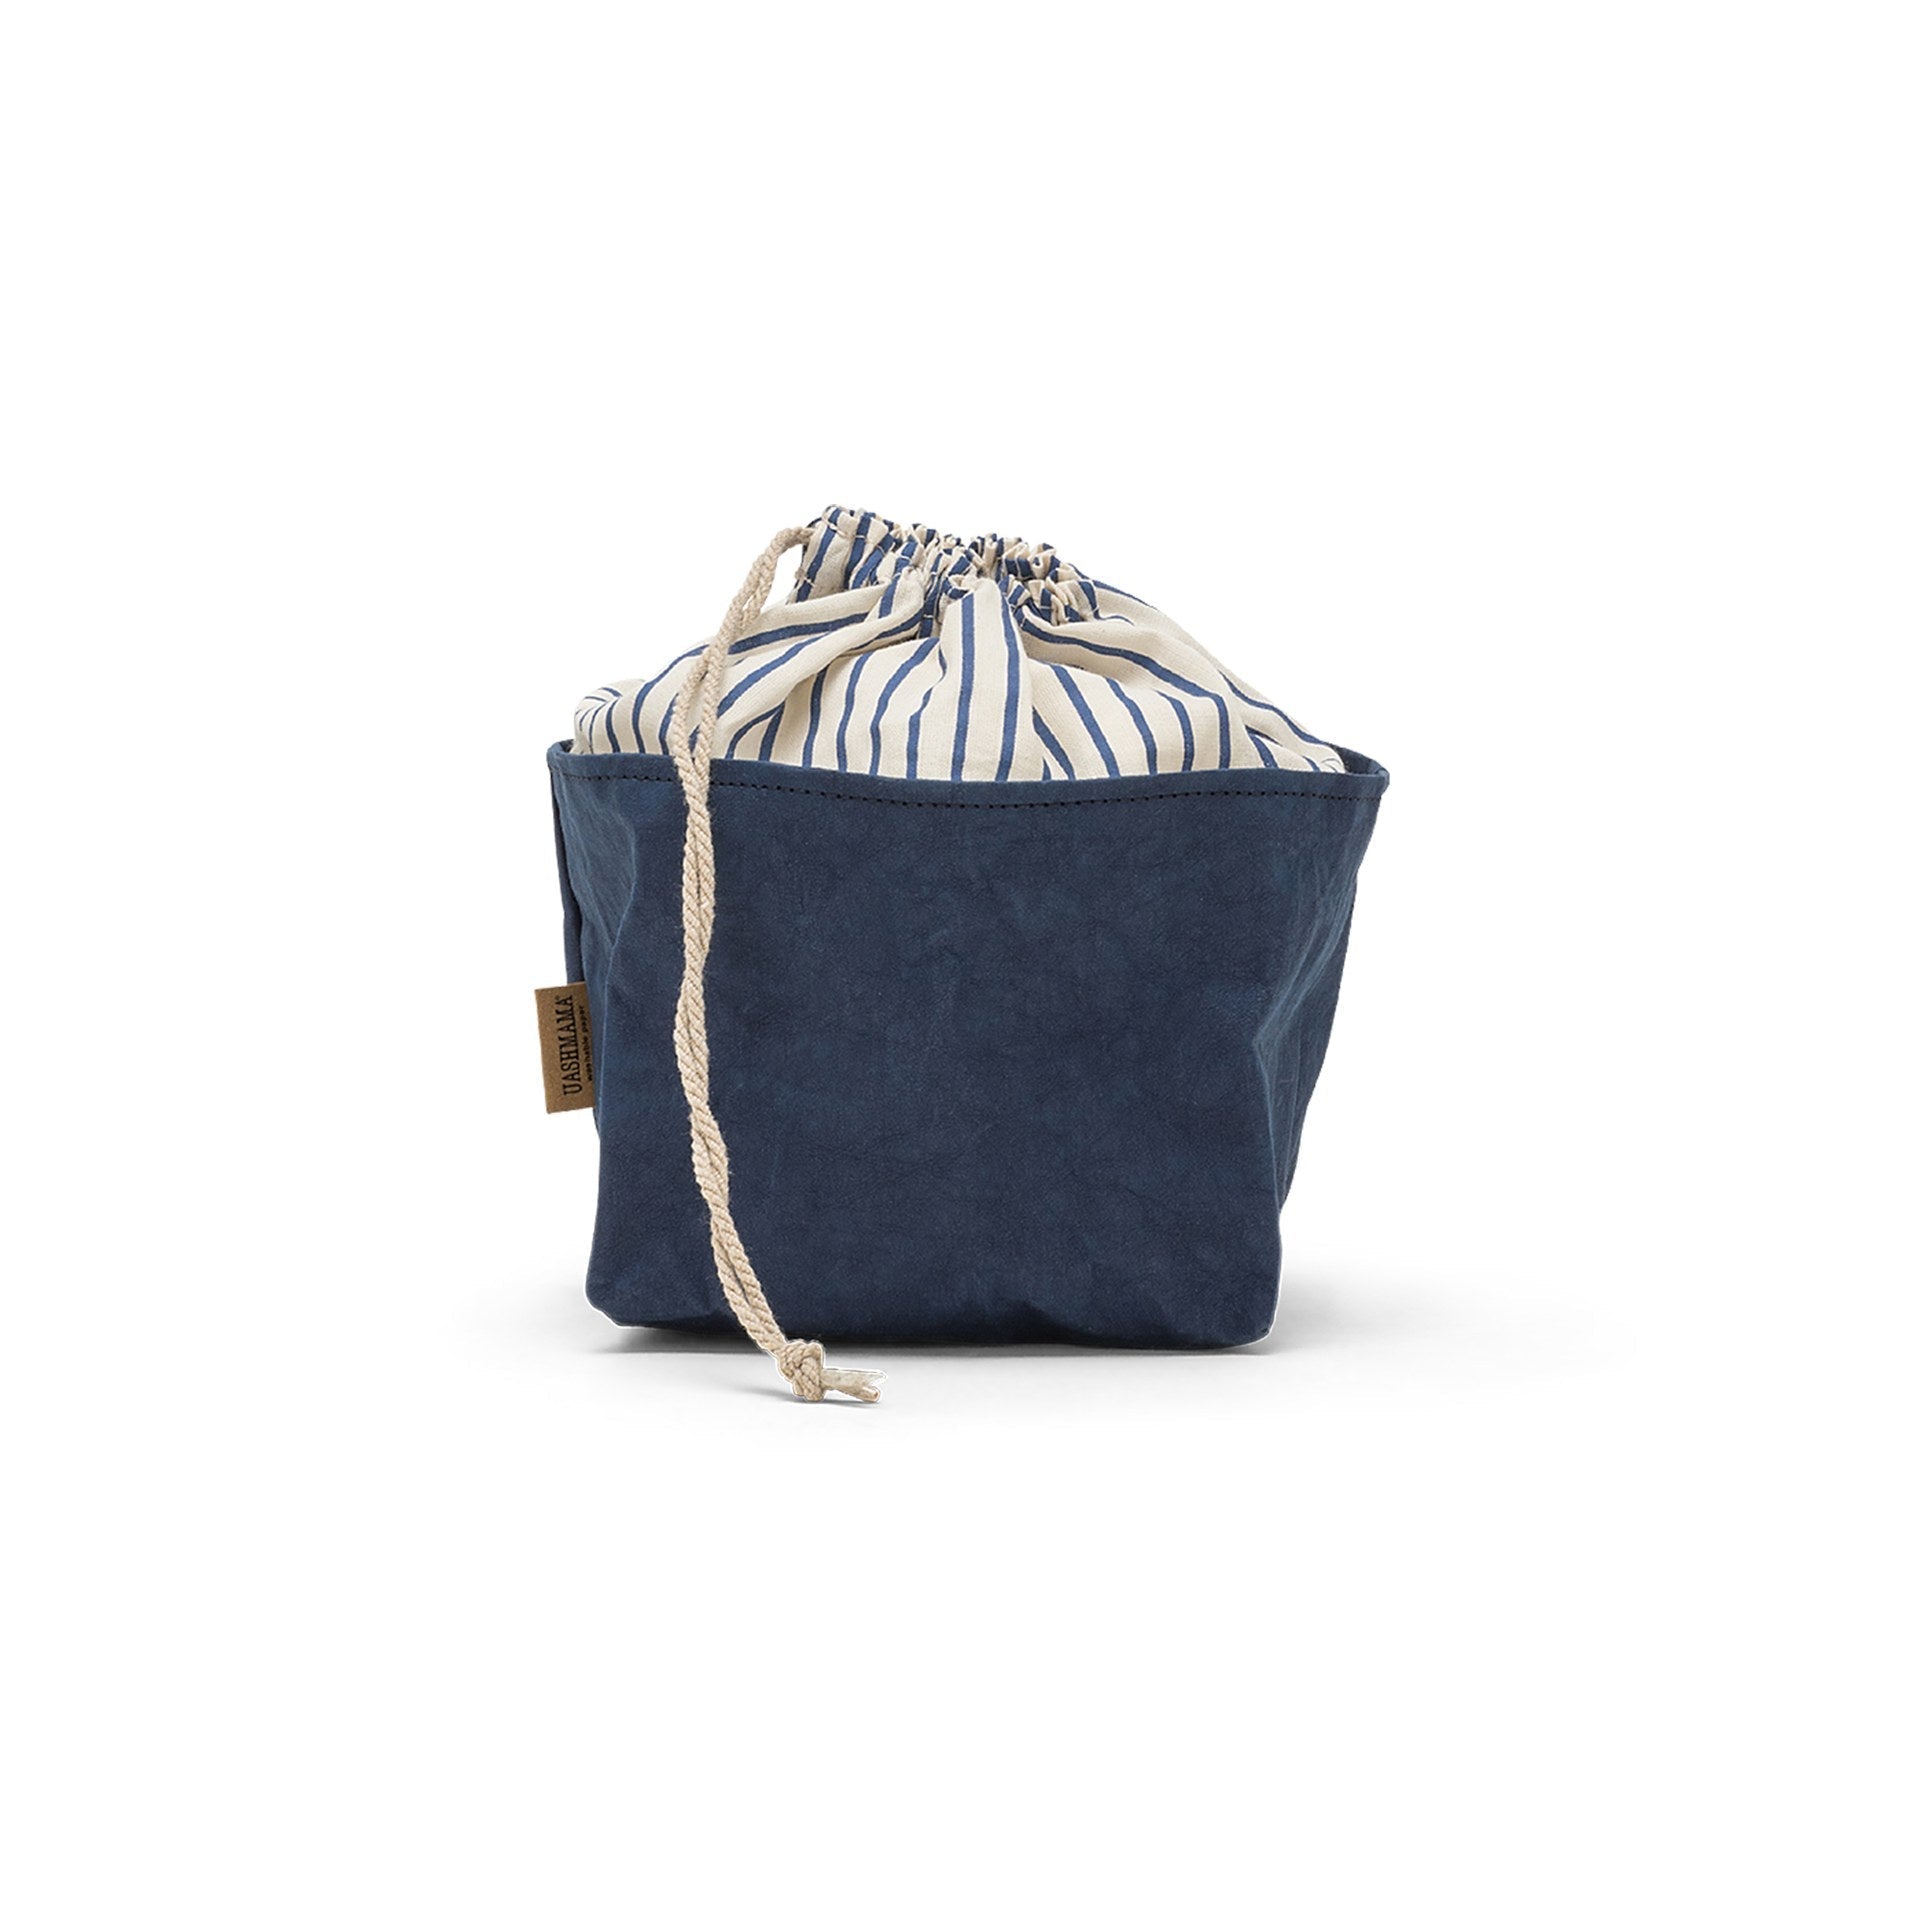 A washable paper bread bag with a drawstring organic linen top is shown. The bag has a small UASHMAMA logo label on the left hand side and fastens with a beige cord drawstring. The bag is blue in colour with a cream and blue cotton drawstring top.